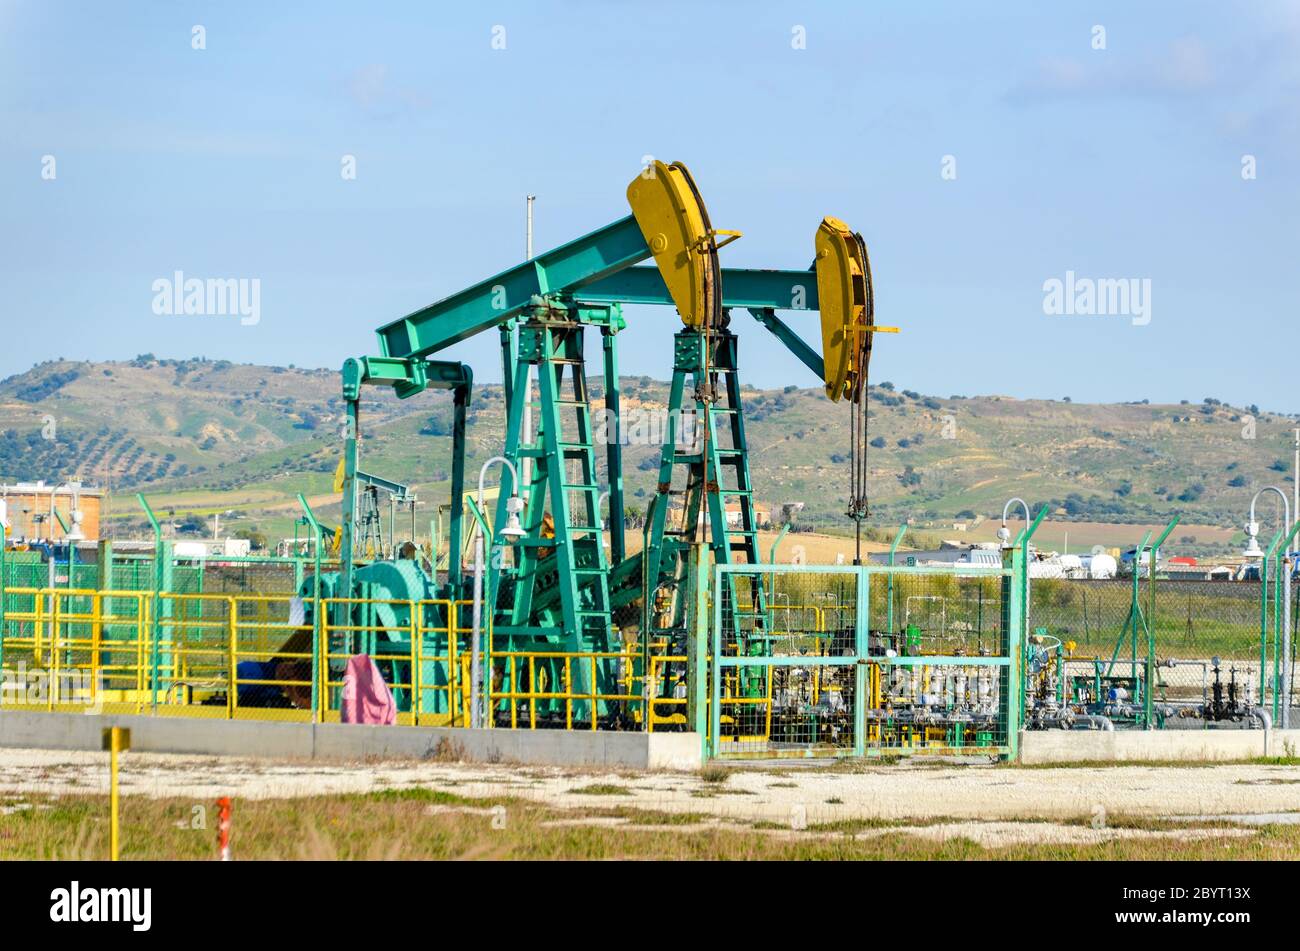 Oil pumpjack at the Gela Refinery, Sicily, Italy Stock Photo